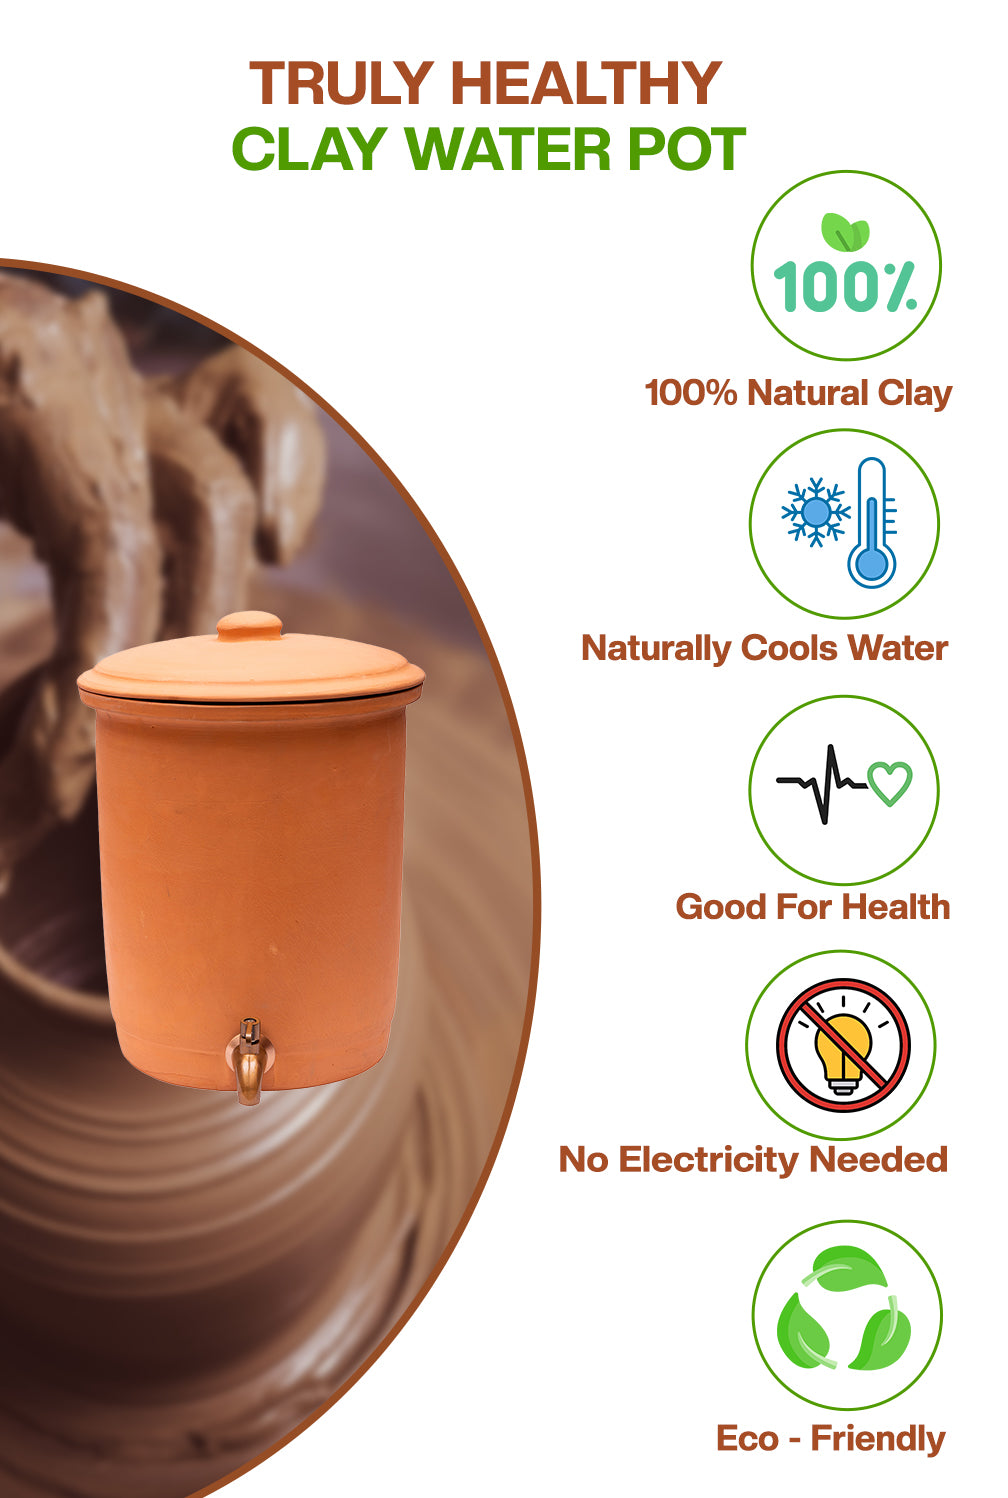 Earthen Clay Water Pot with Lid (Pre-Seasoned) and 304 Stainless Steel Copper Color Tap - 8 Liter